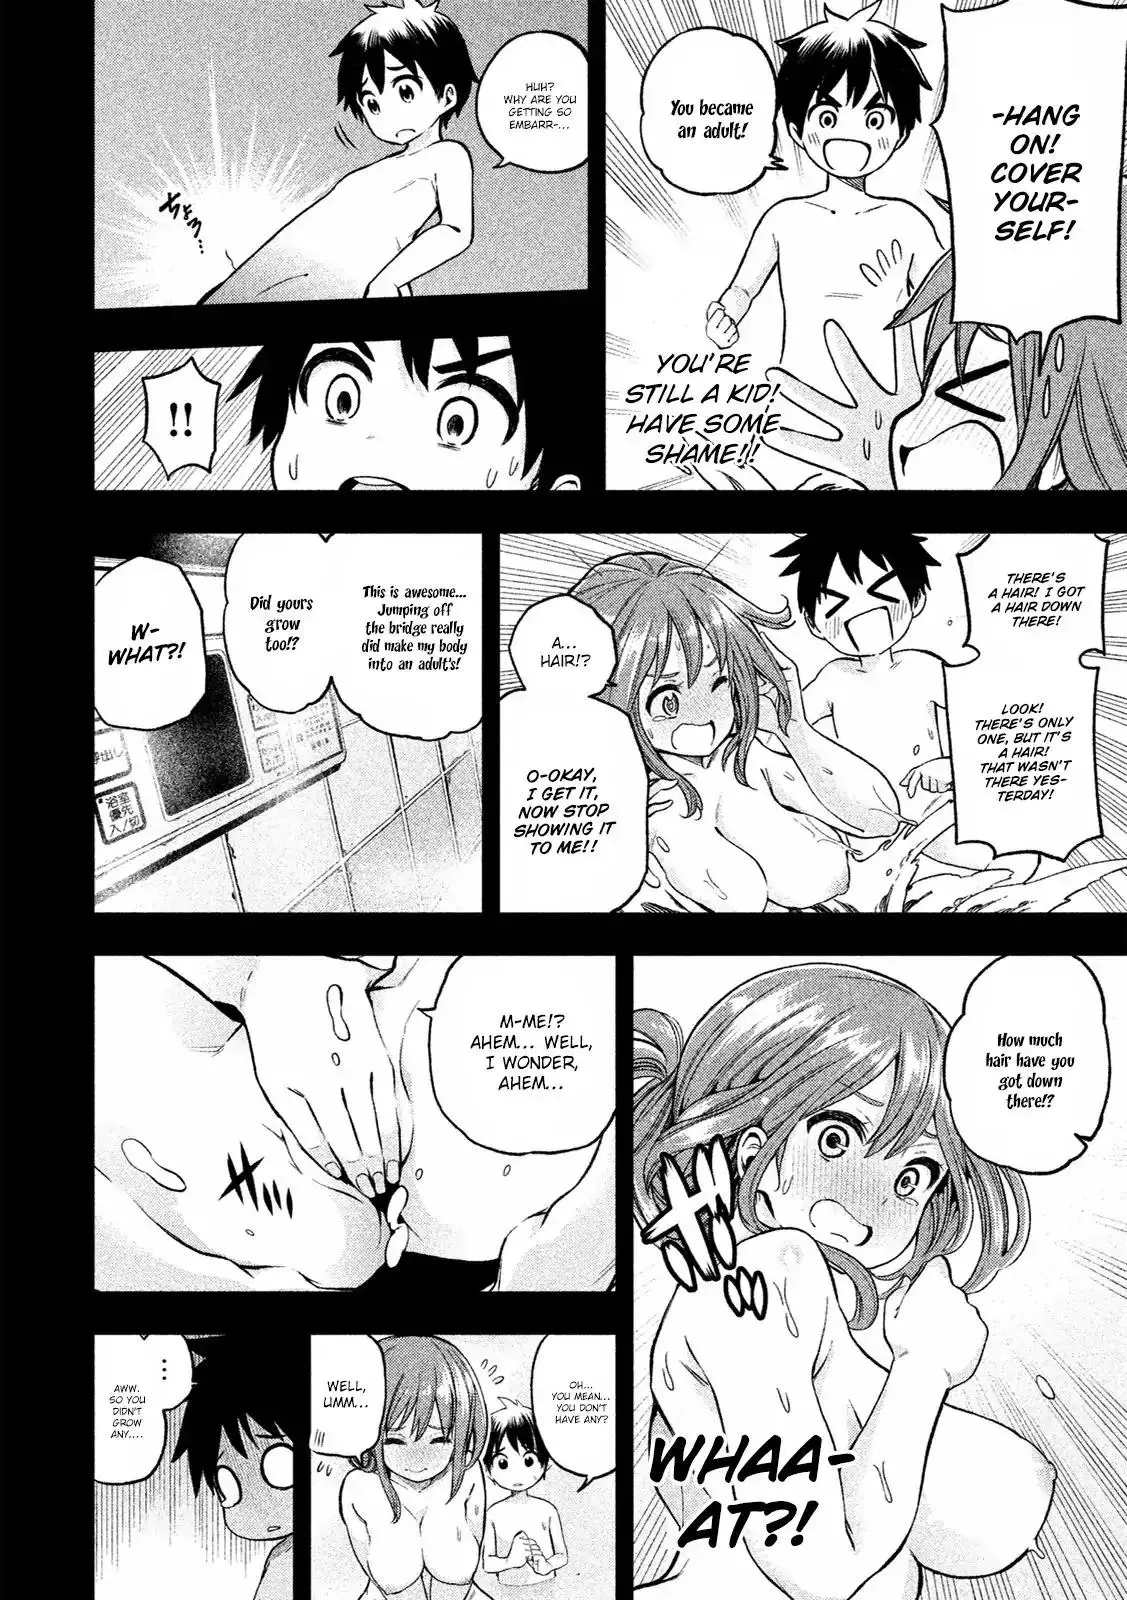 Why are you here Sensei!? - 7 page 10